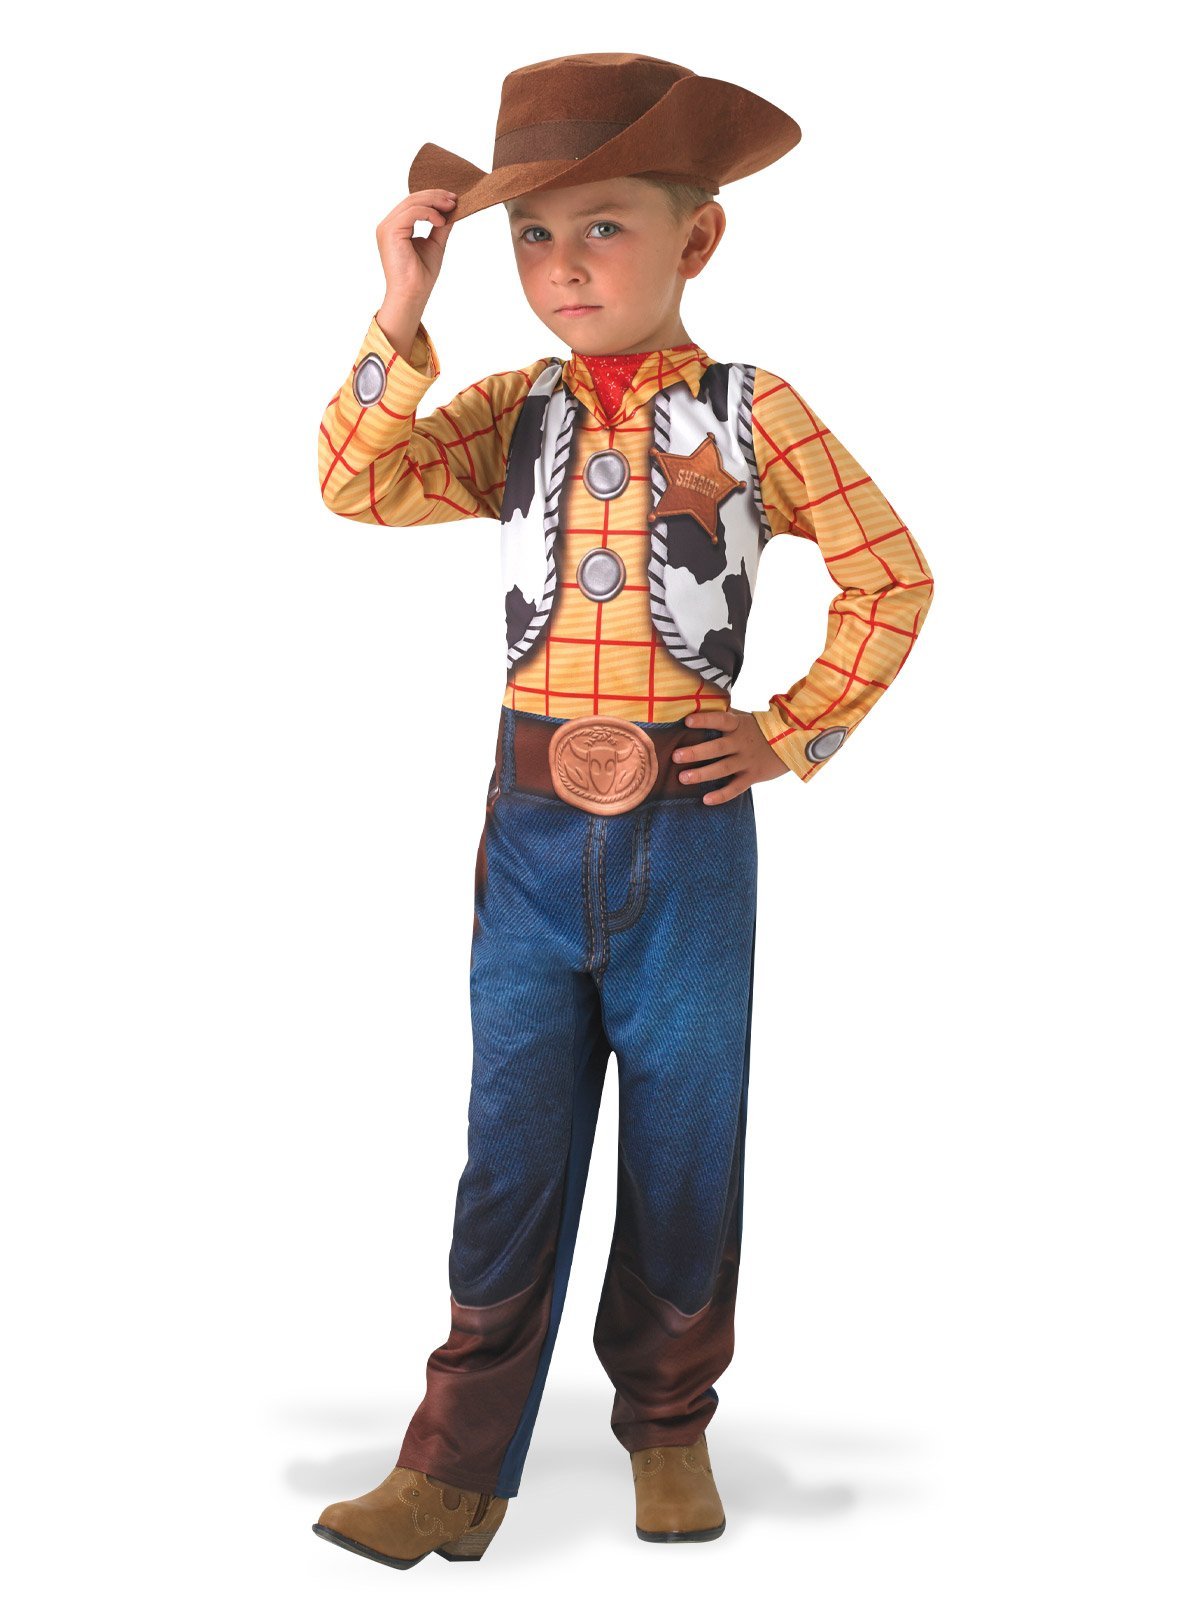 Luxury pistols and holsters, child - Your Online Costume Store